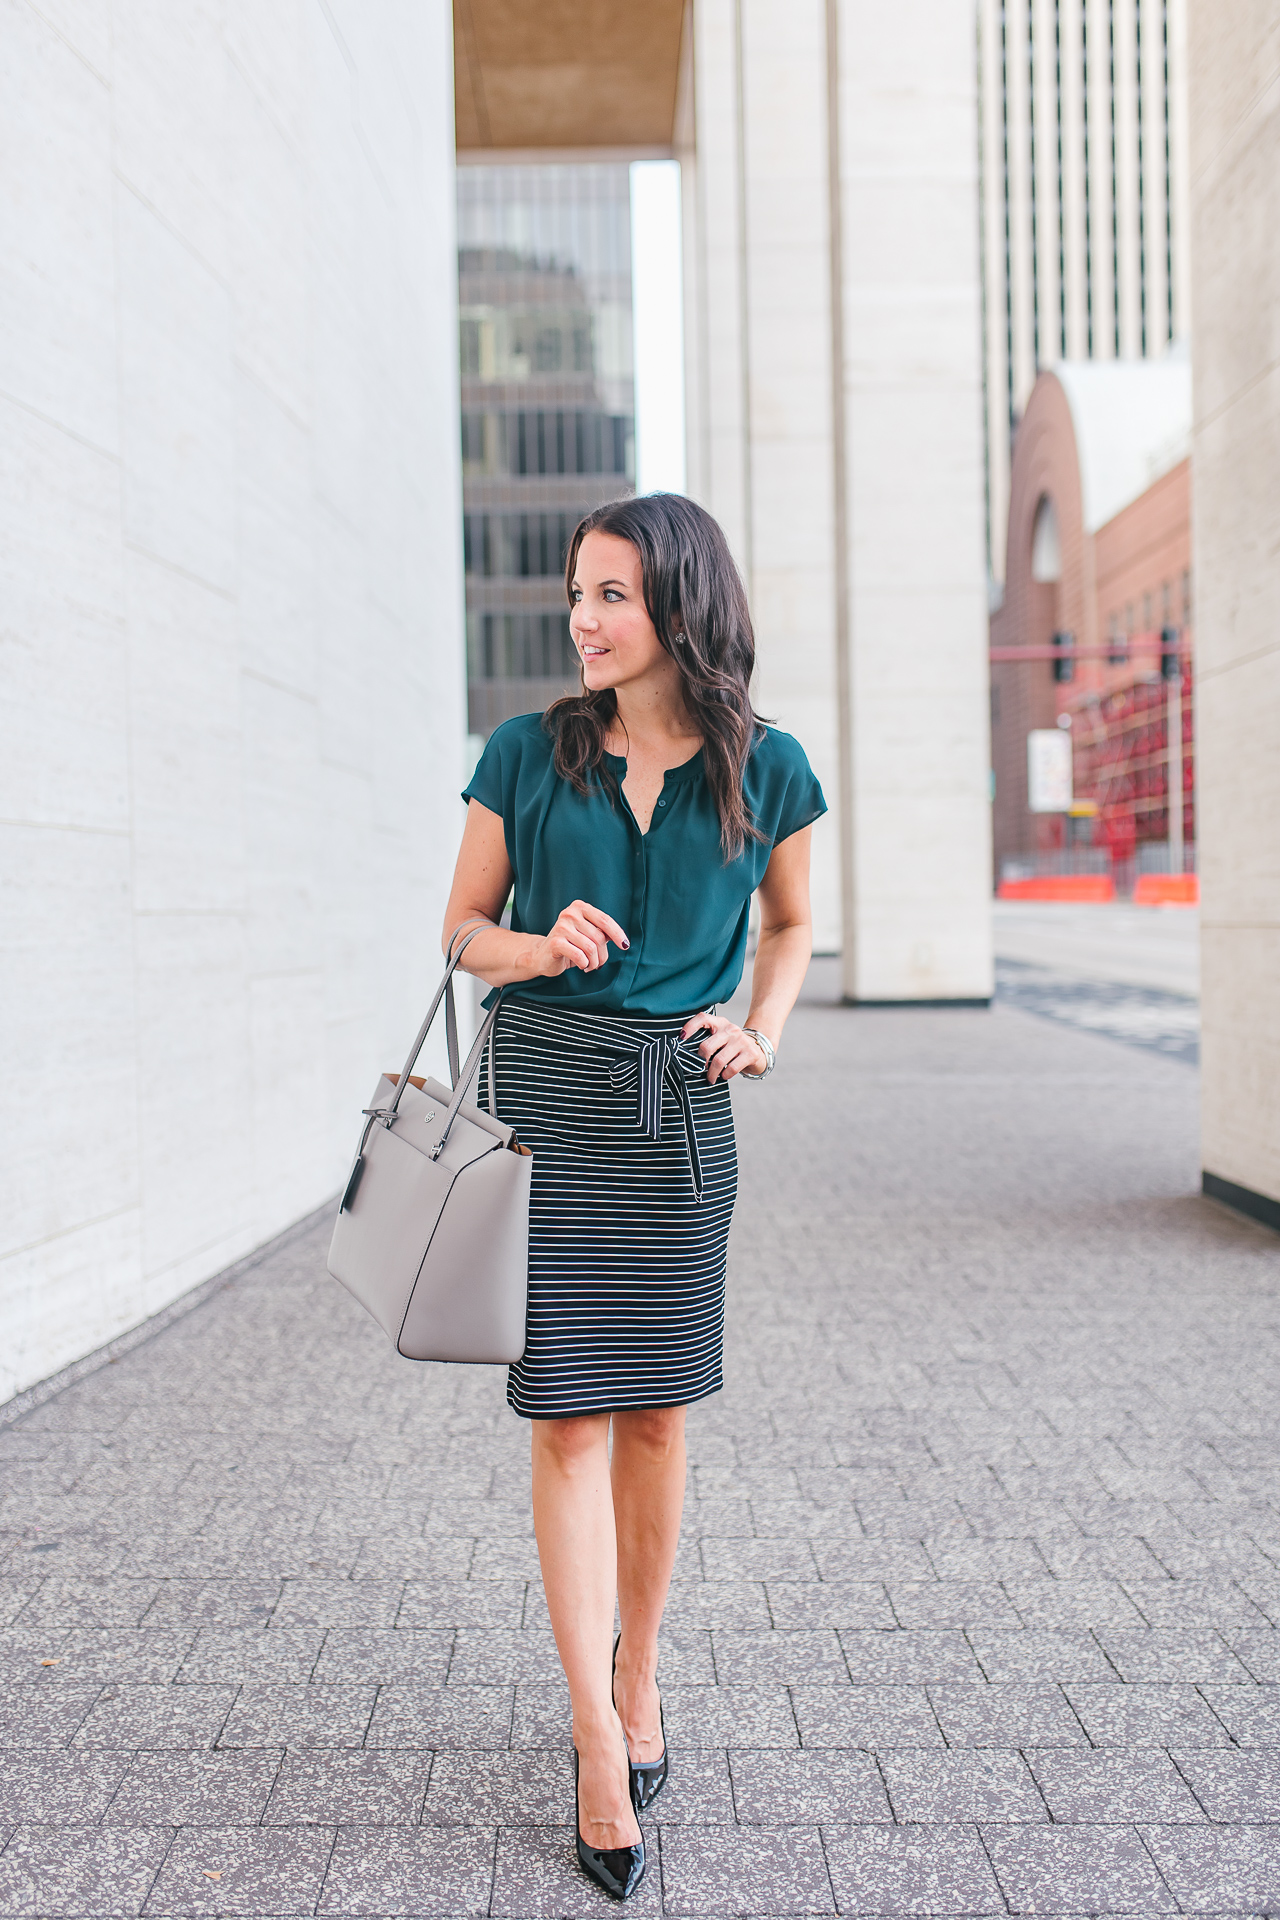 Striped Pencil Skirt Outfit | vlr.eng.br